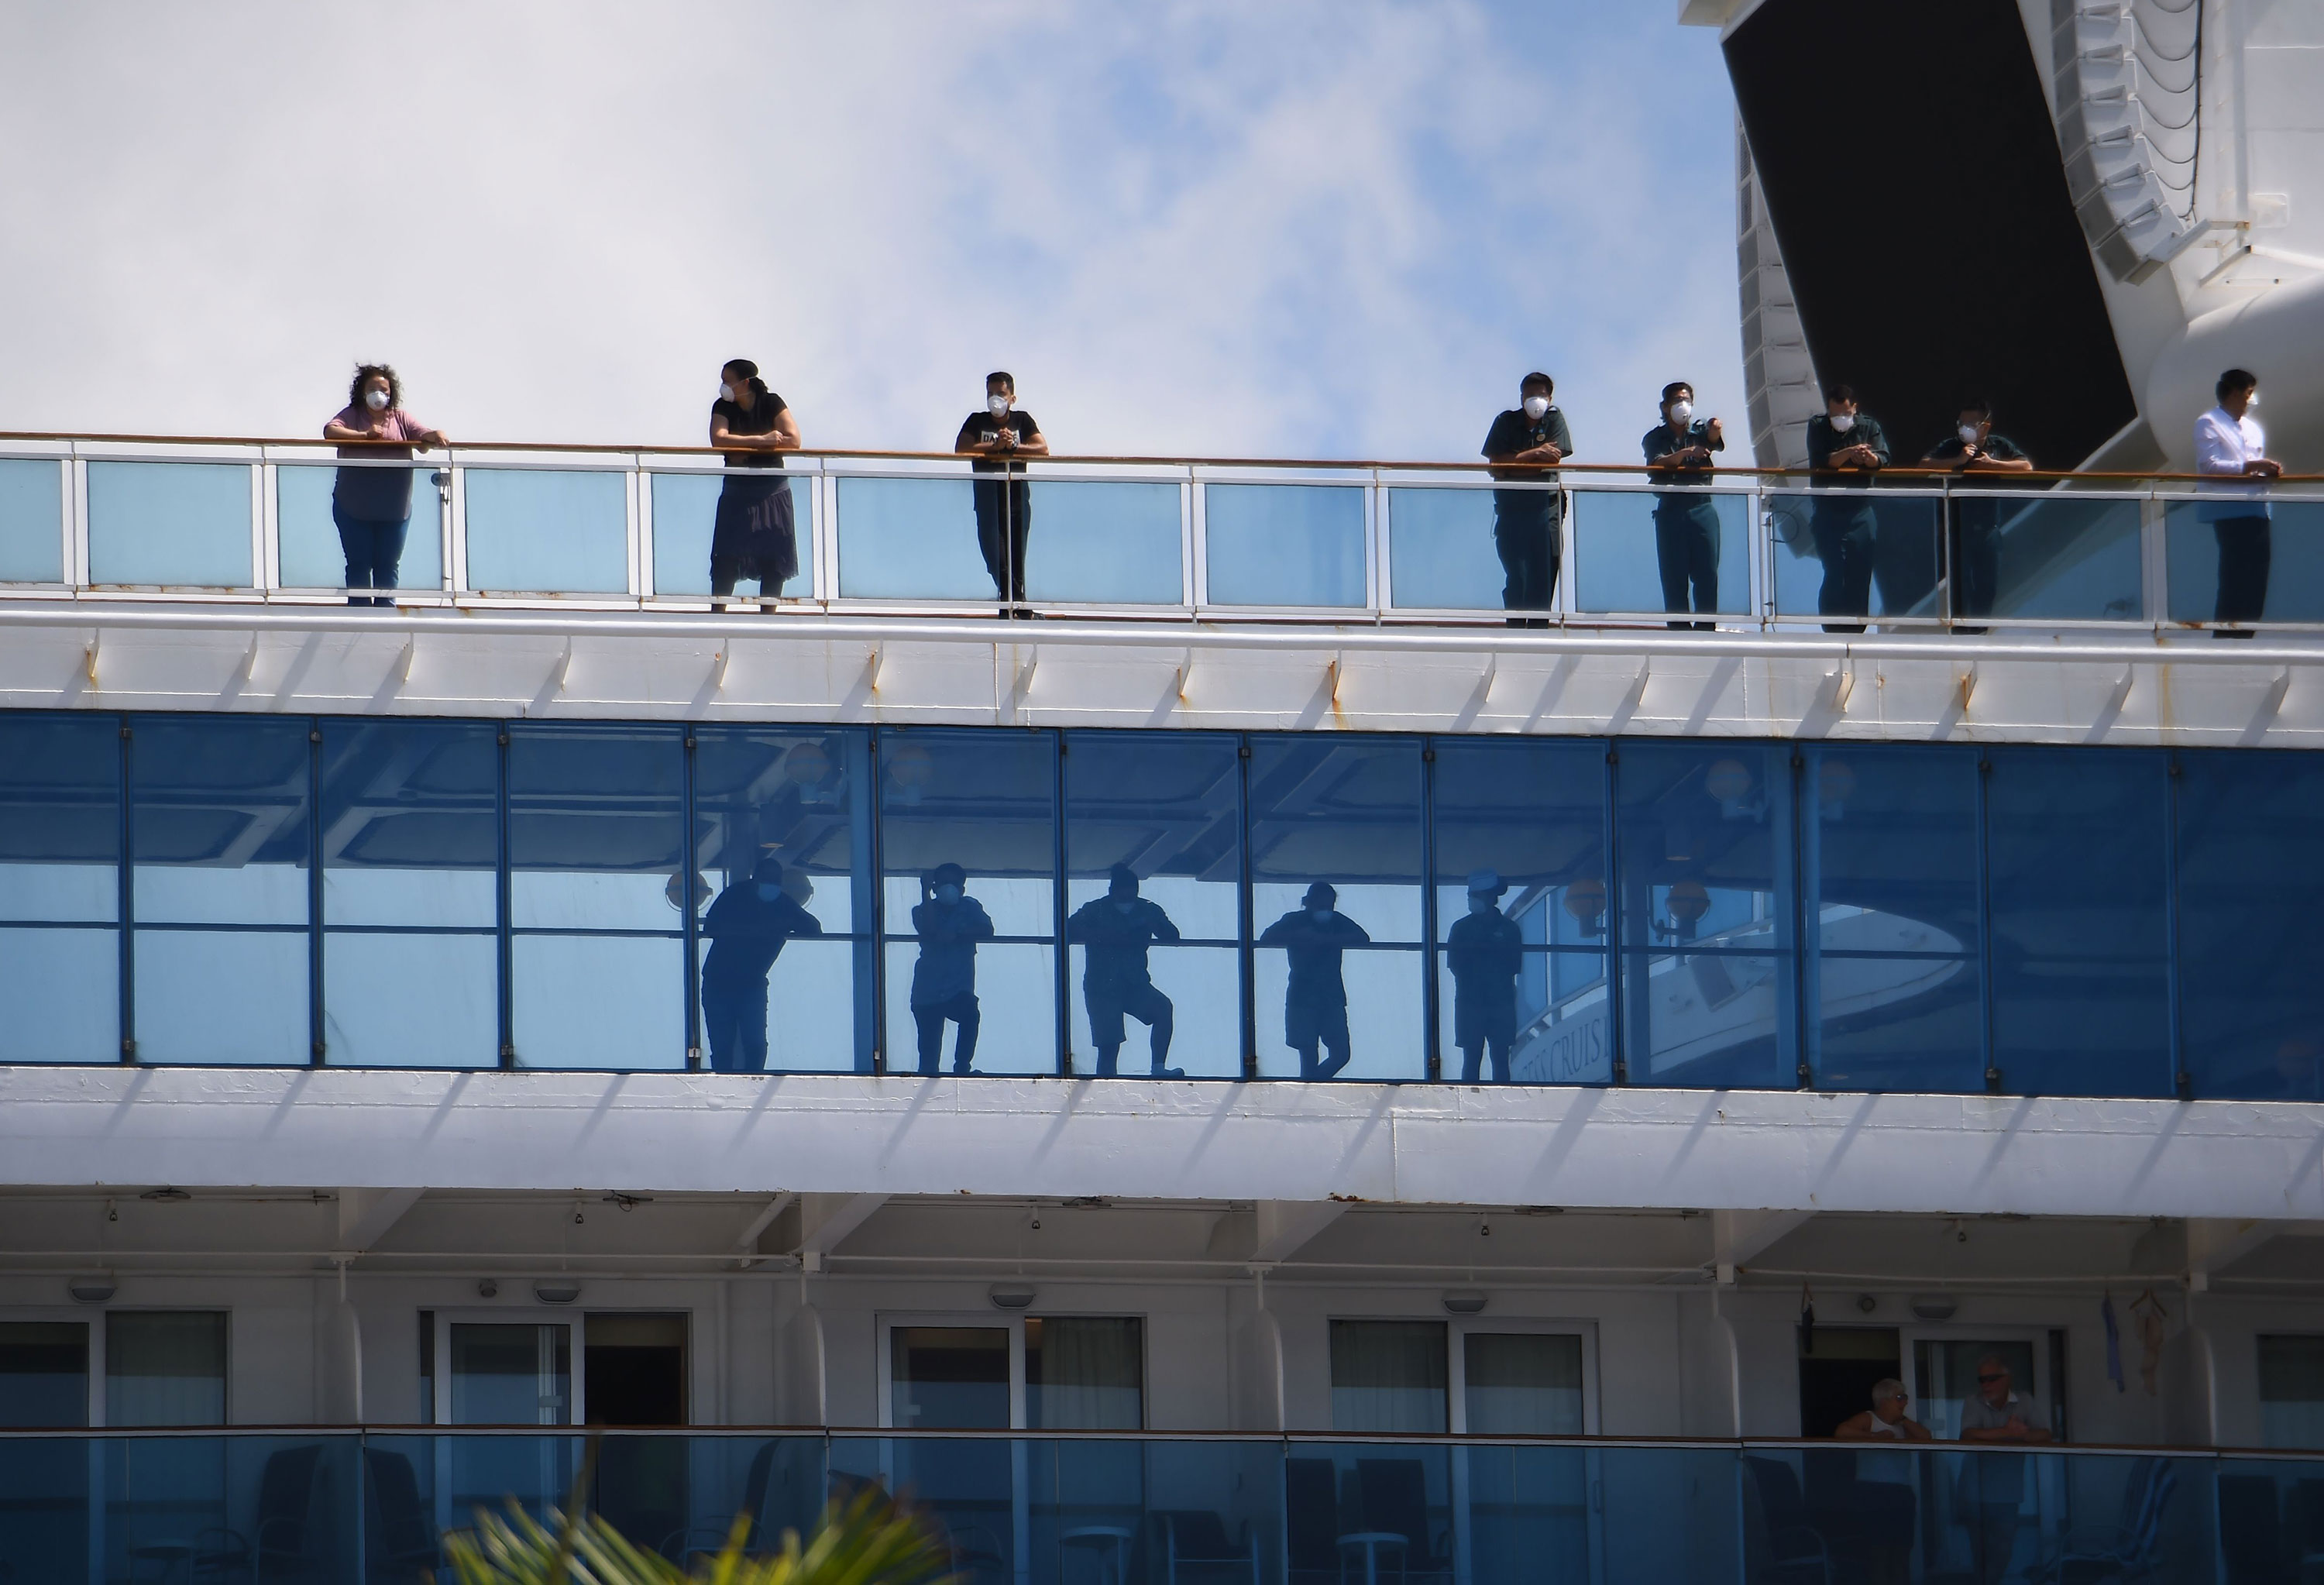 Passengers look out from the deck of the Coral Princess cruise ship as it docks in Miami, Florida, on April 4.